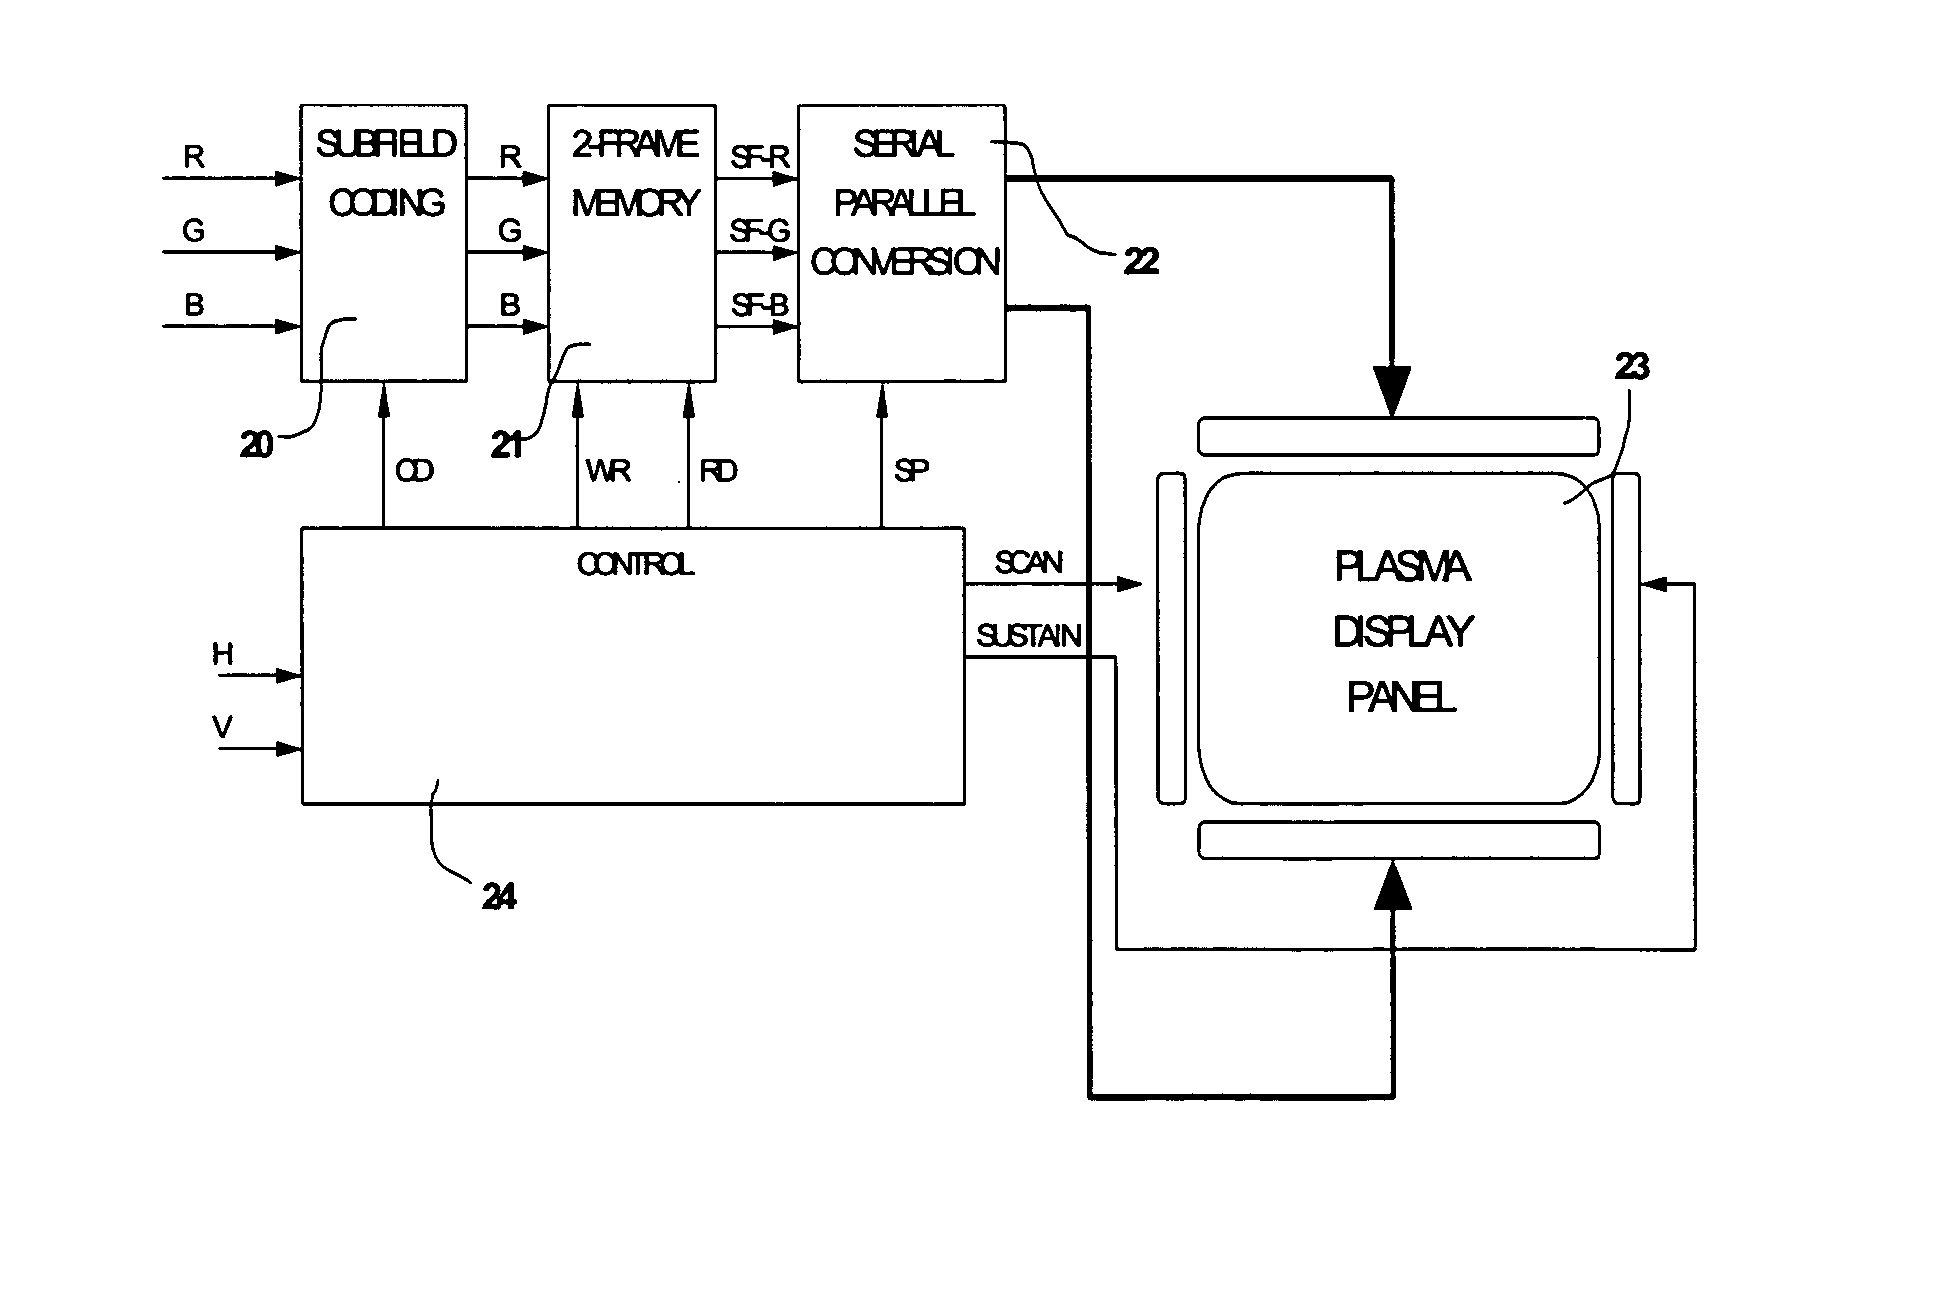 Method and apparatus for controlling a display device